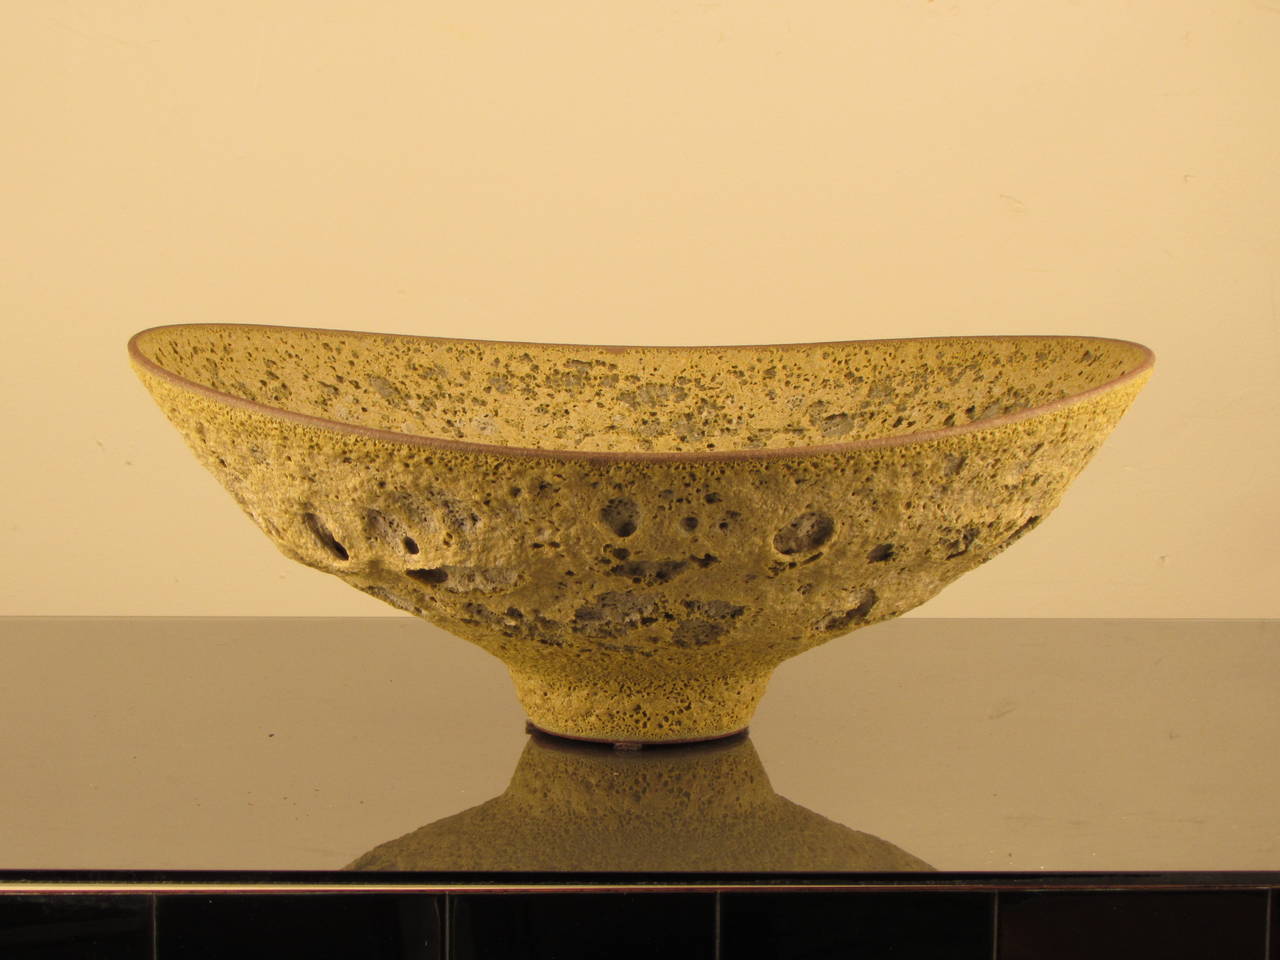 Jaw-dropping glazed stoneware footed bowl by working studio potter, Jeremy Briddell (b.1971). This piece features a spectacular chartreuse crater glaze reminiscent of the work of the Natzlers. Incredibly well-thrown and beautifully balanced;